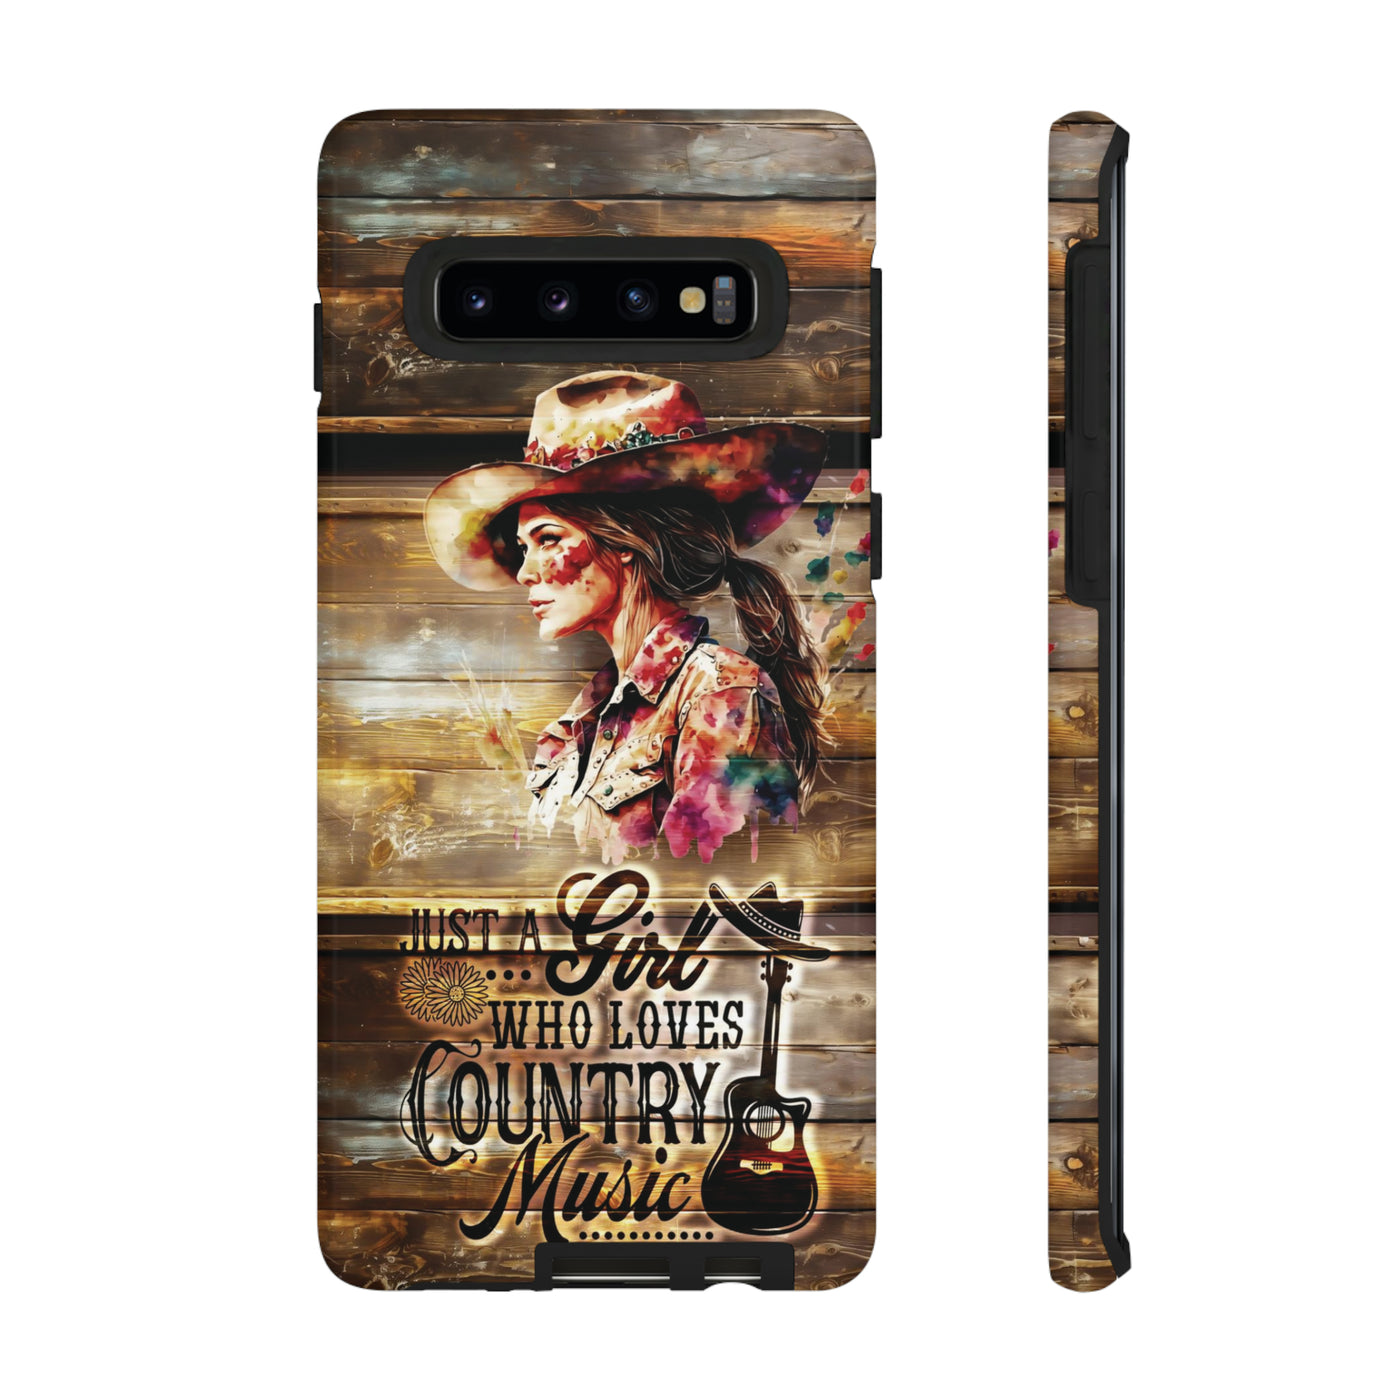 Cute Samsung Phone Case | Aesthetic Samsung Phone Case | Galaxy S23, S22, S21, S20 | Country Music Girl, Protective Phone Case